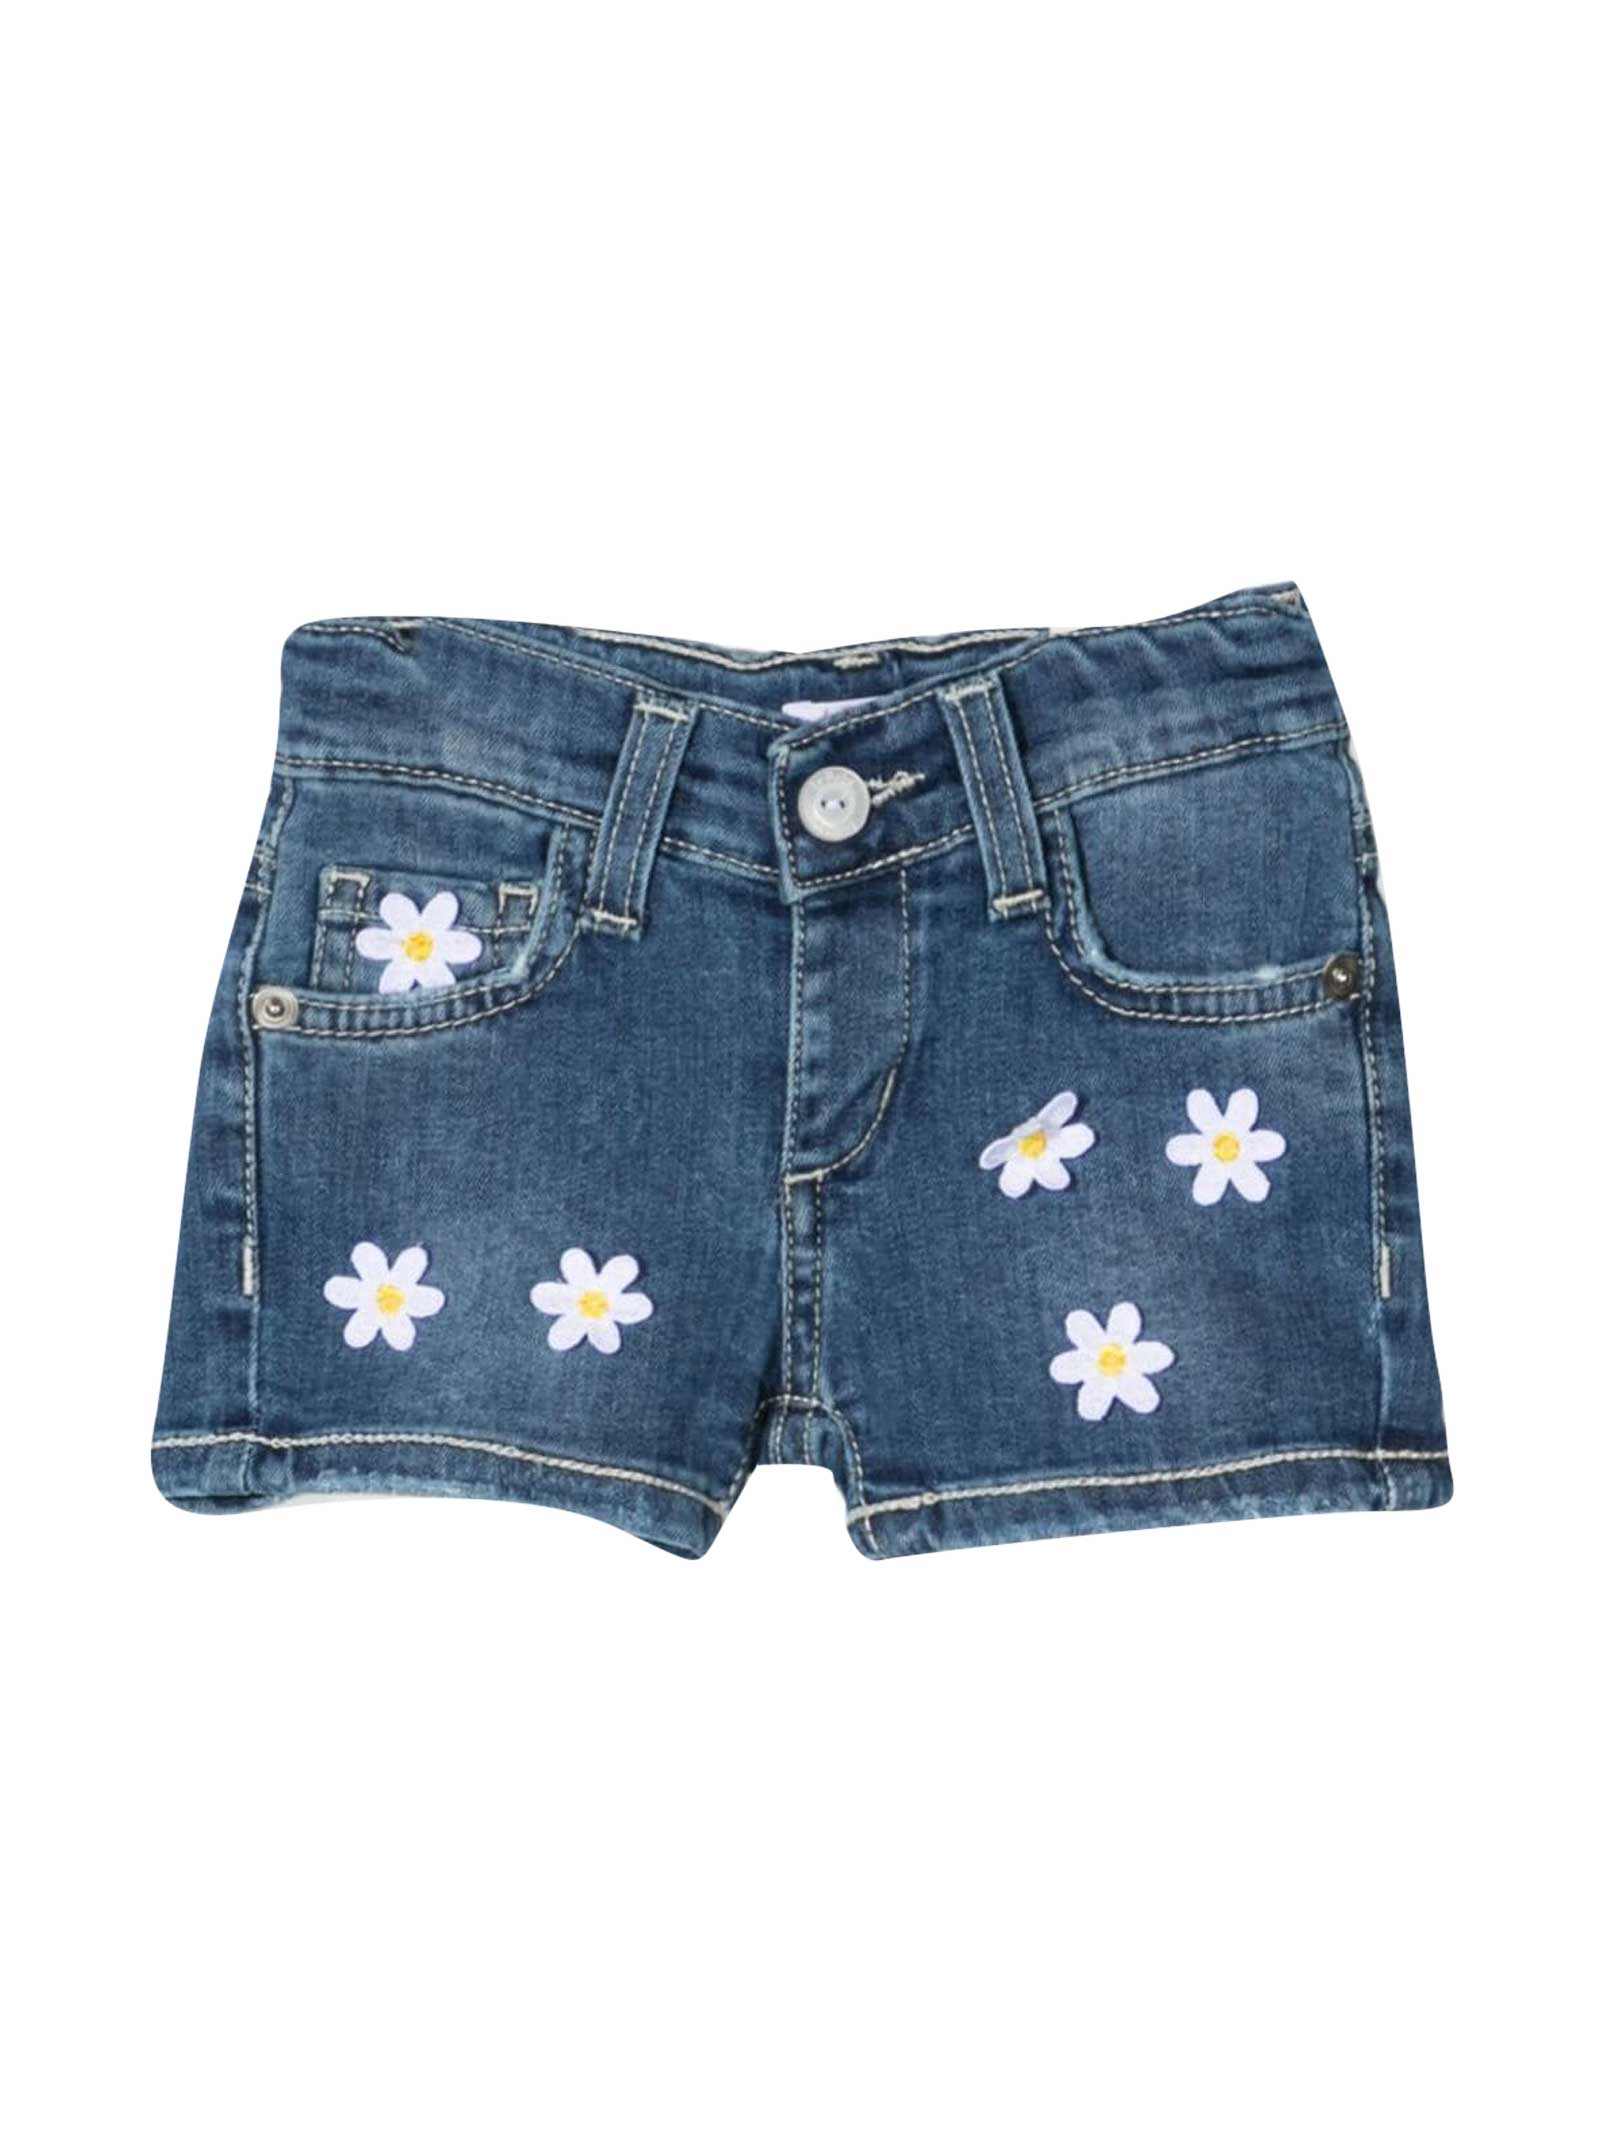 LeBebé Denim Shorts With Floral Embroidery